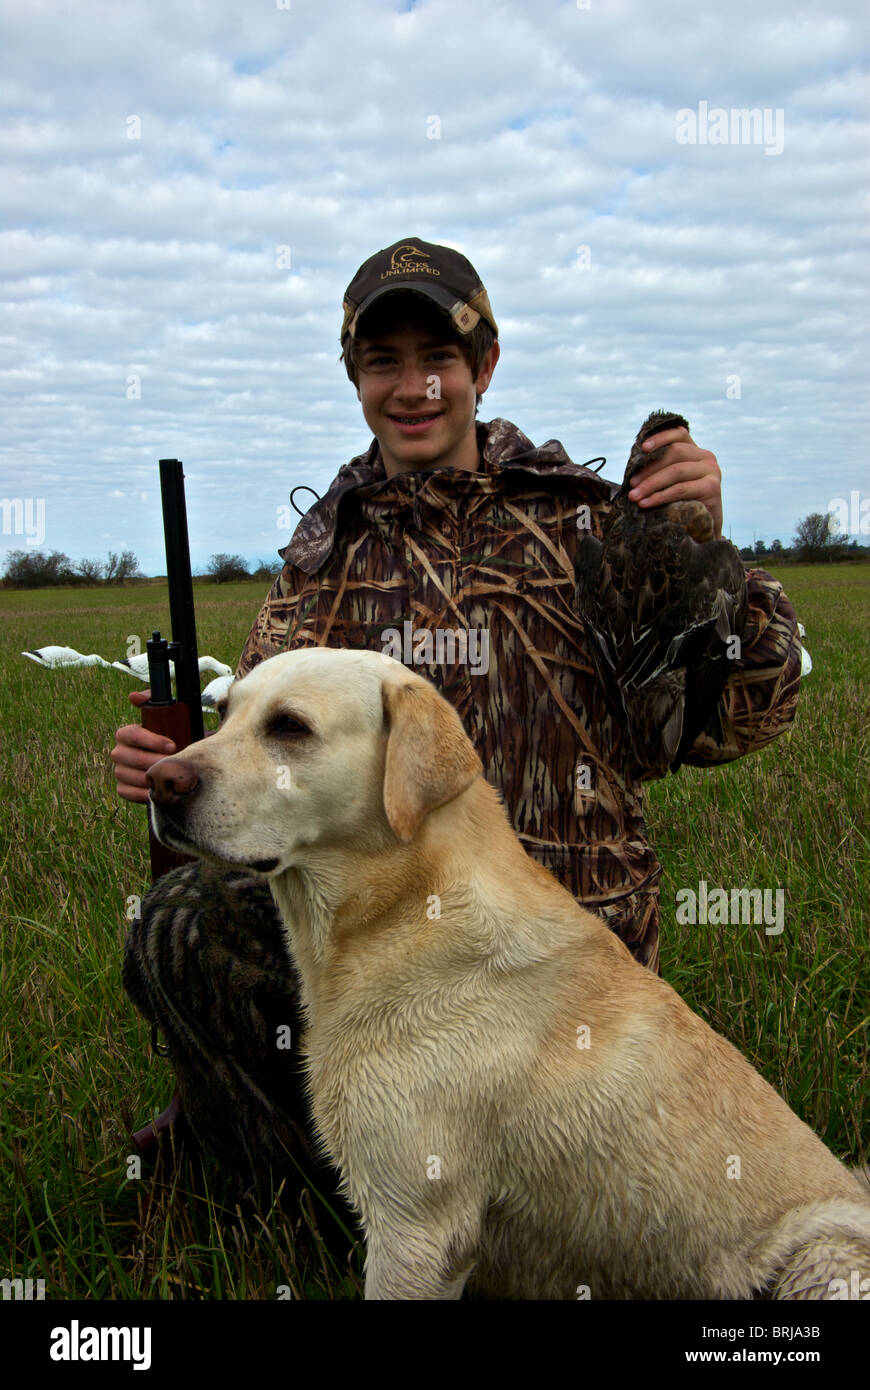 Young duck hunter wearing camouflage clothing holding dead American widgeon and shotgun in harvested barley stubble field Stock Photo